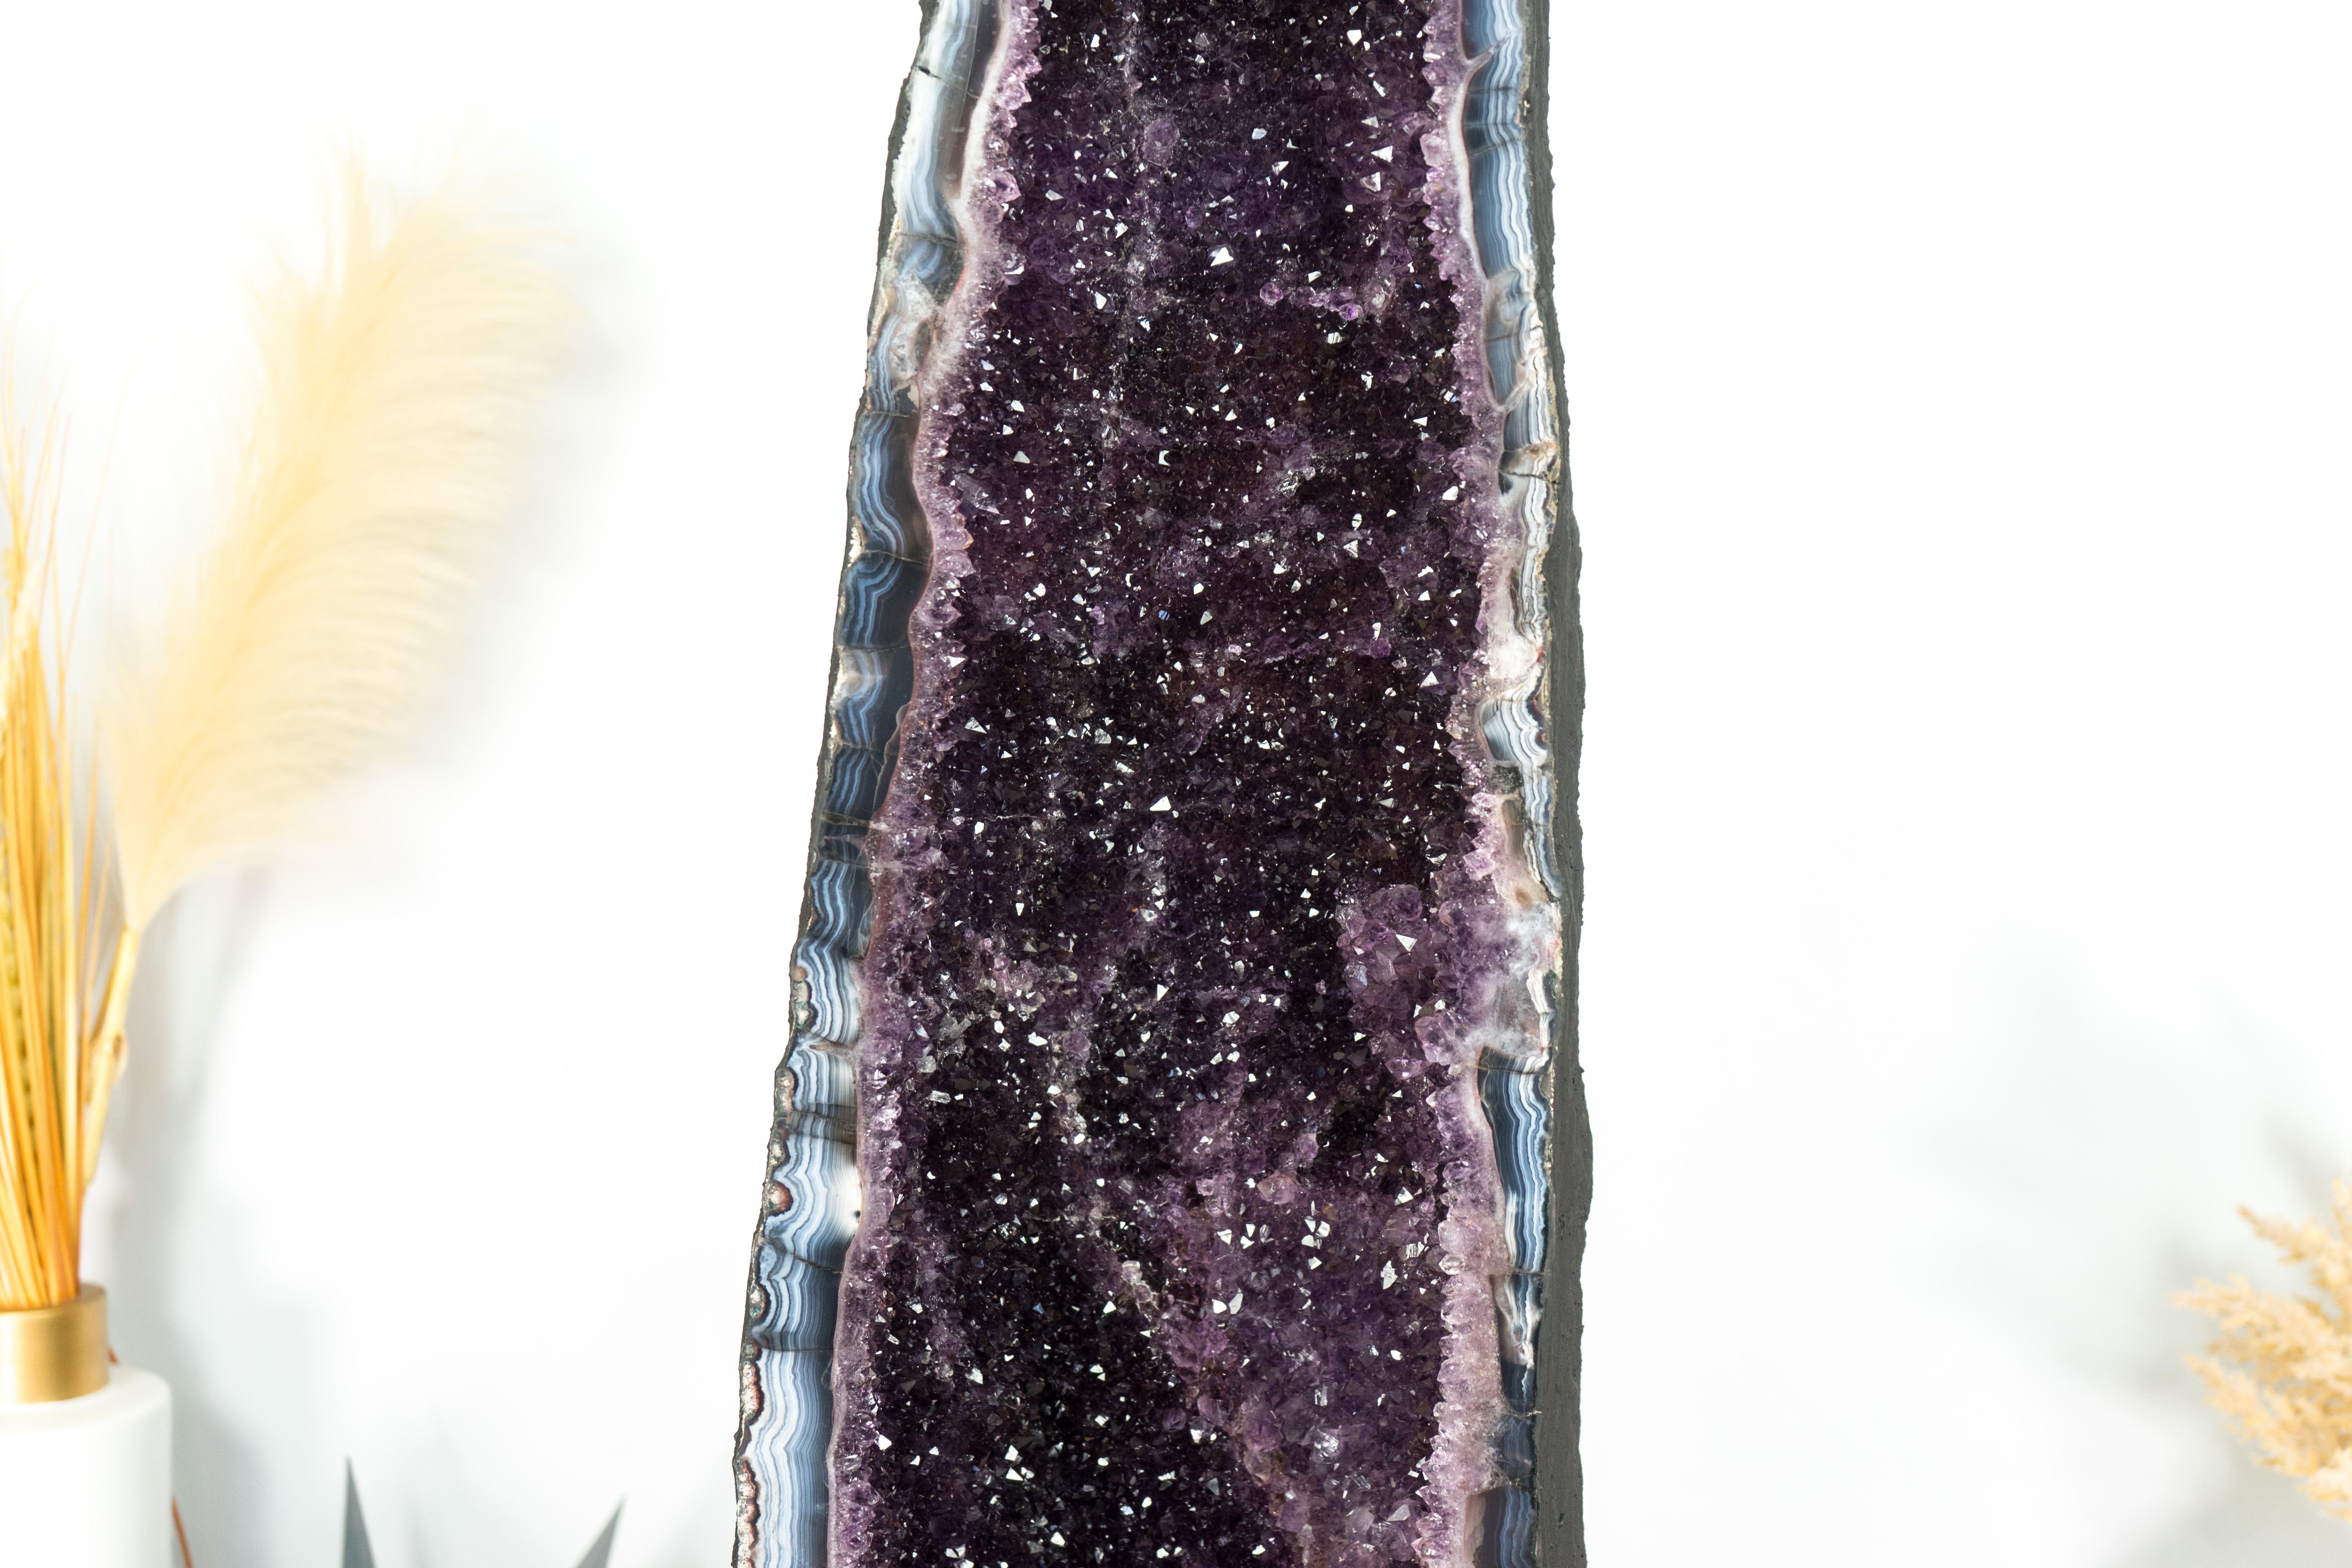 Deep Purple Amethyst Cathedral Geode, with Lace Agate and Calcite, Large & Tall For Sale 4